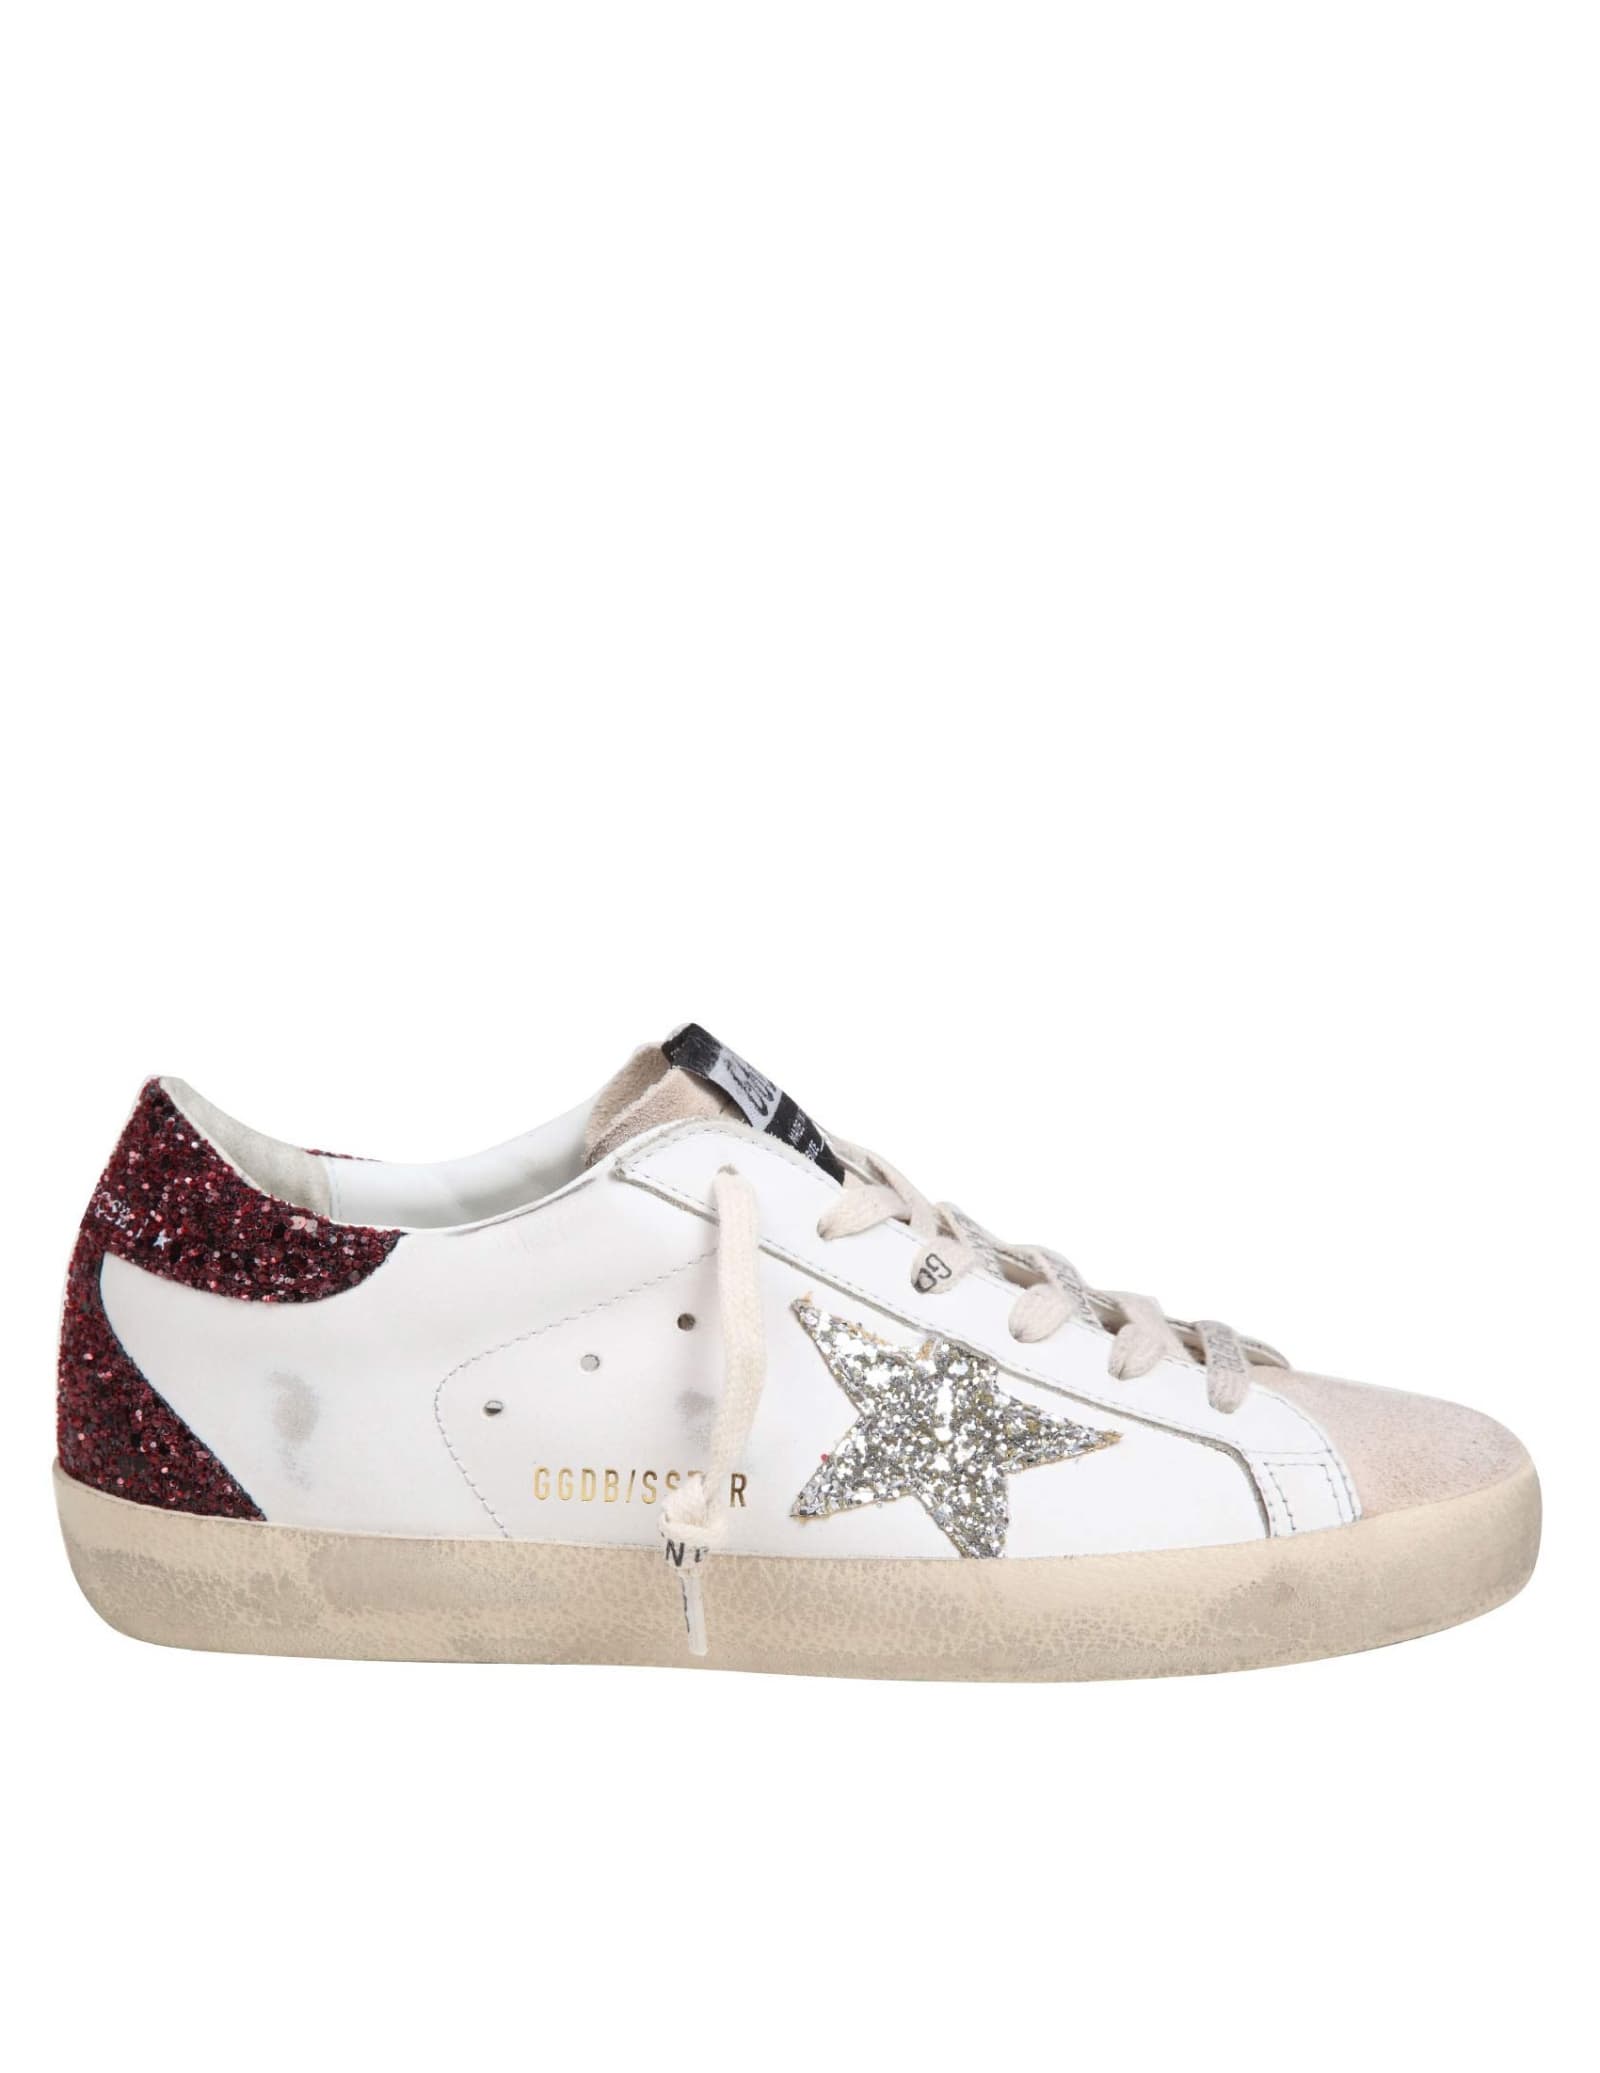 Super Star Sneakers In White/bordeaux Leather And Suede